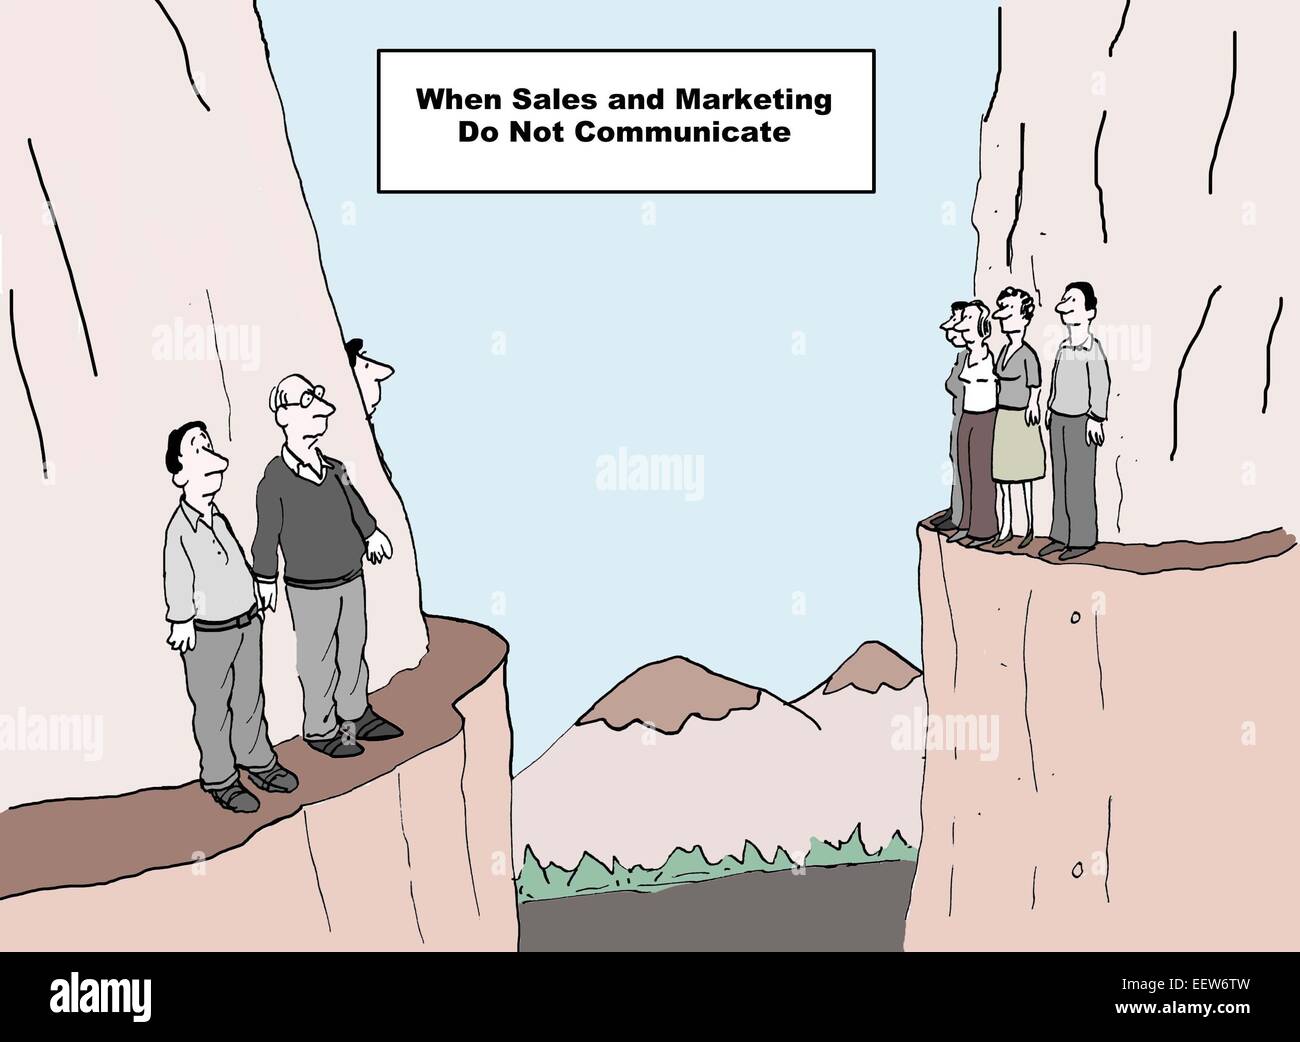 Cartoon showing two groups of business people on opposing cliffs and stating when sales and marketing do not communicate. Stock Photo